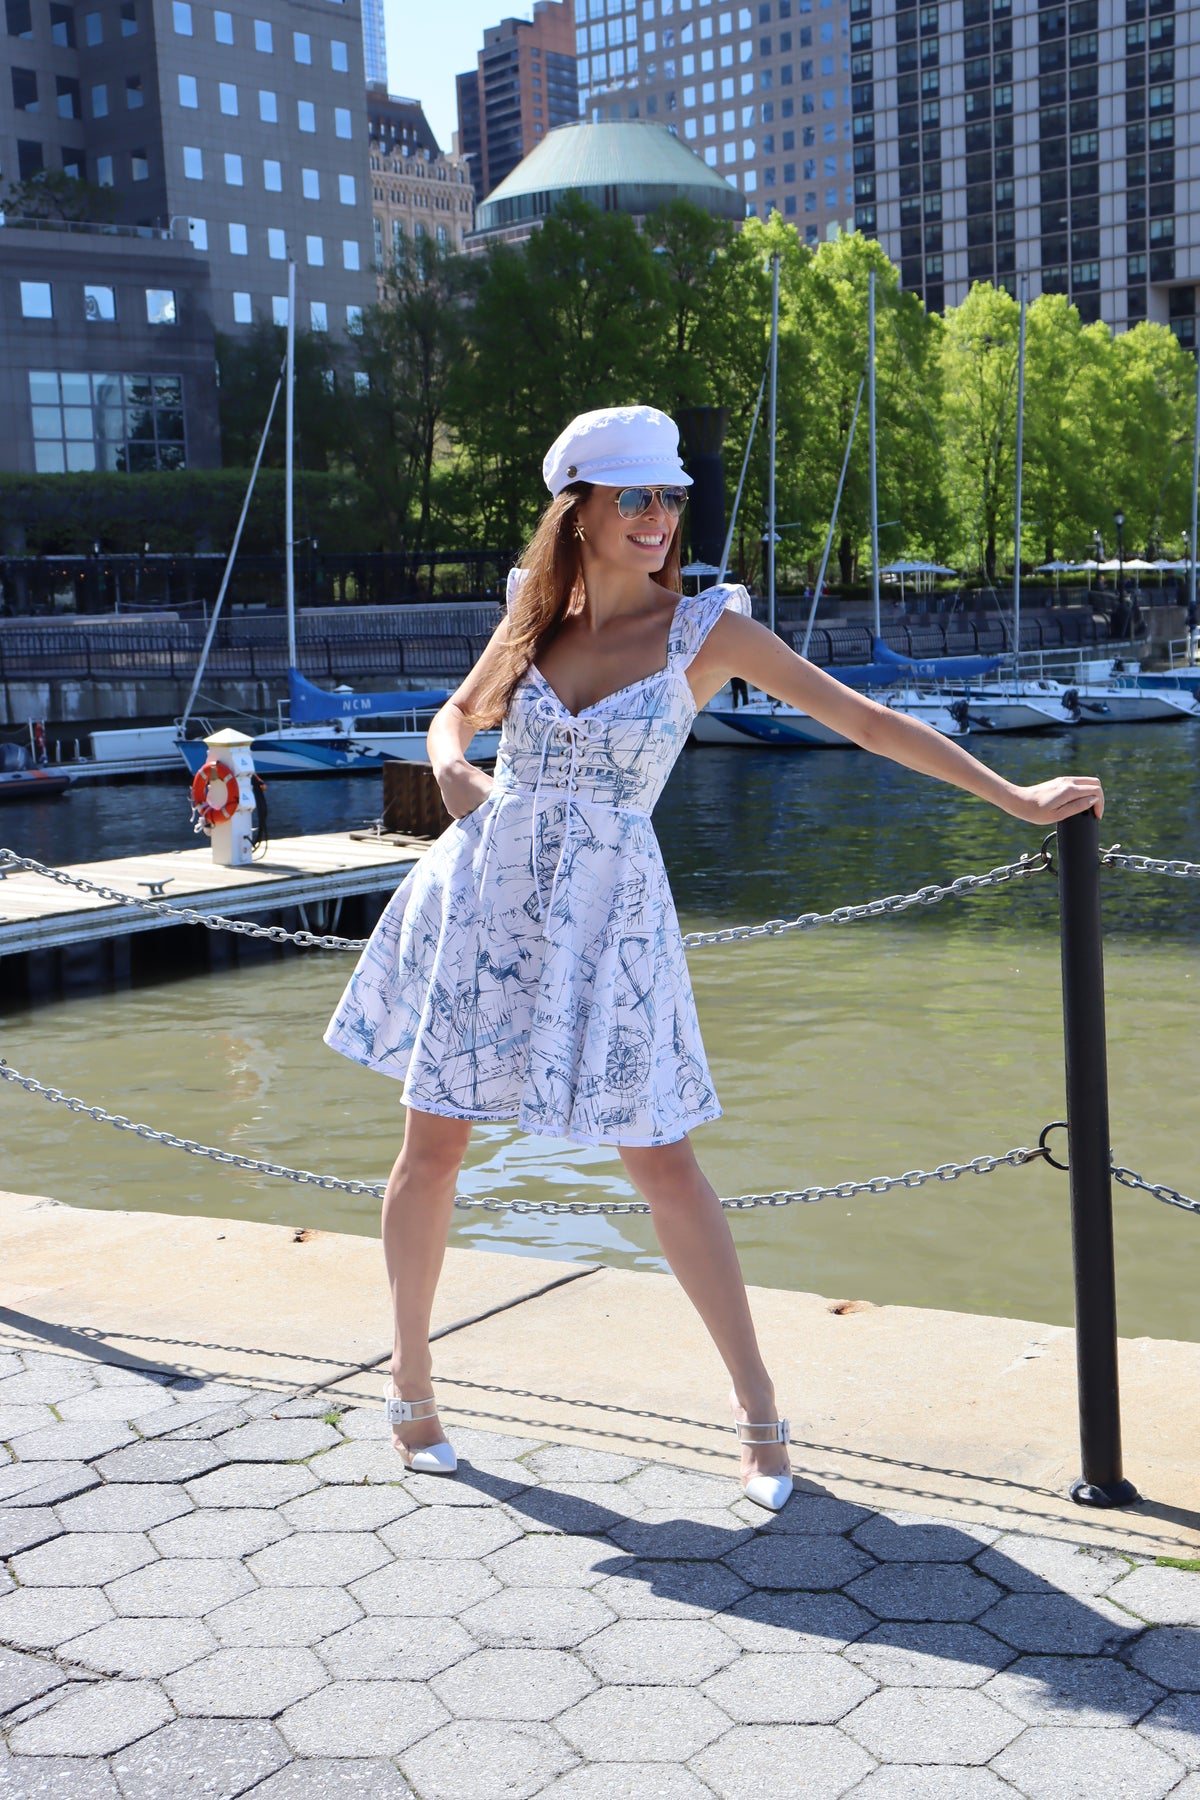 Model wearing heavy toile schooner print and a white hat standing in front of water.